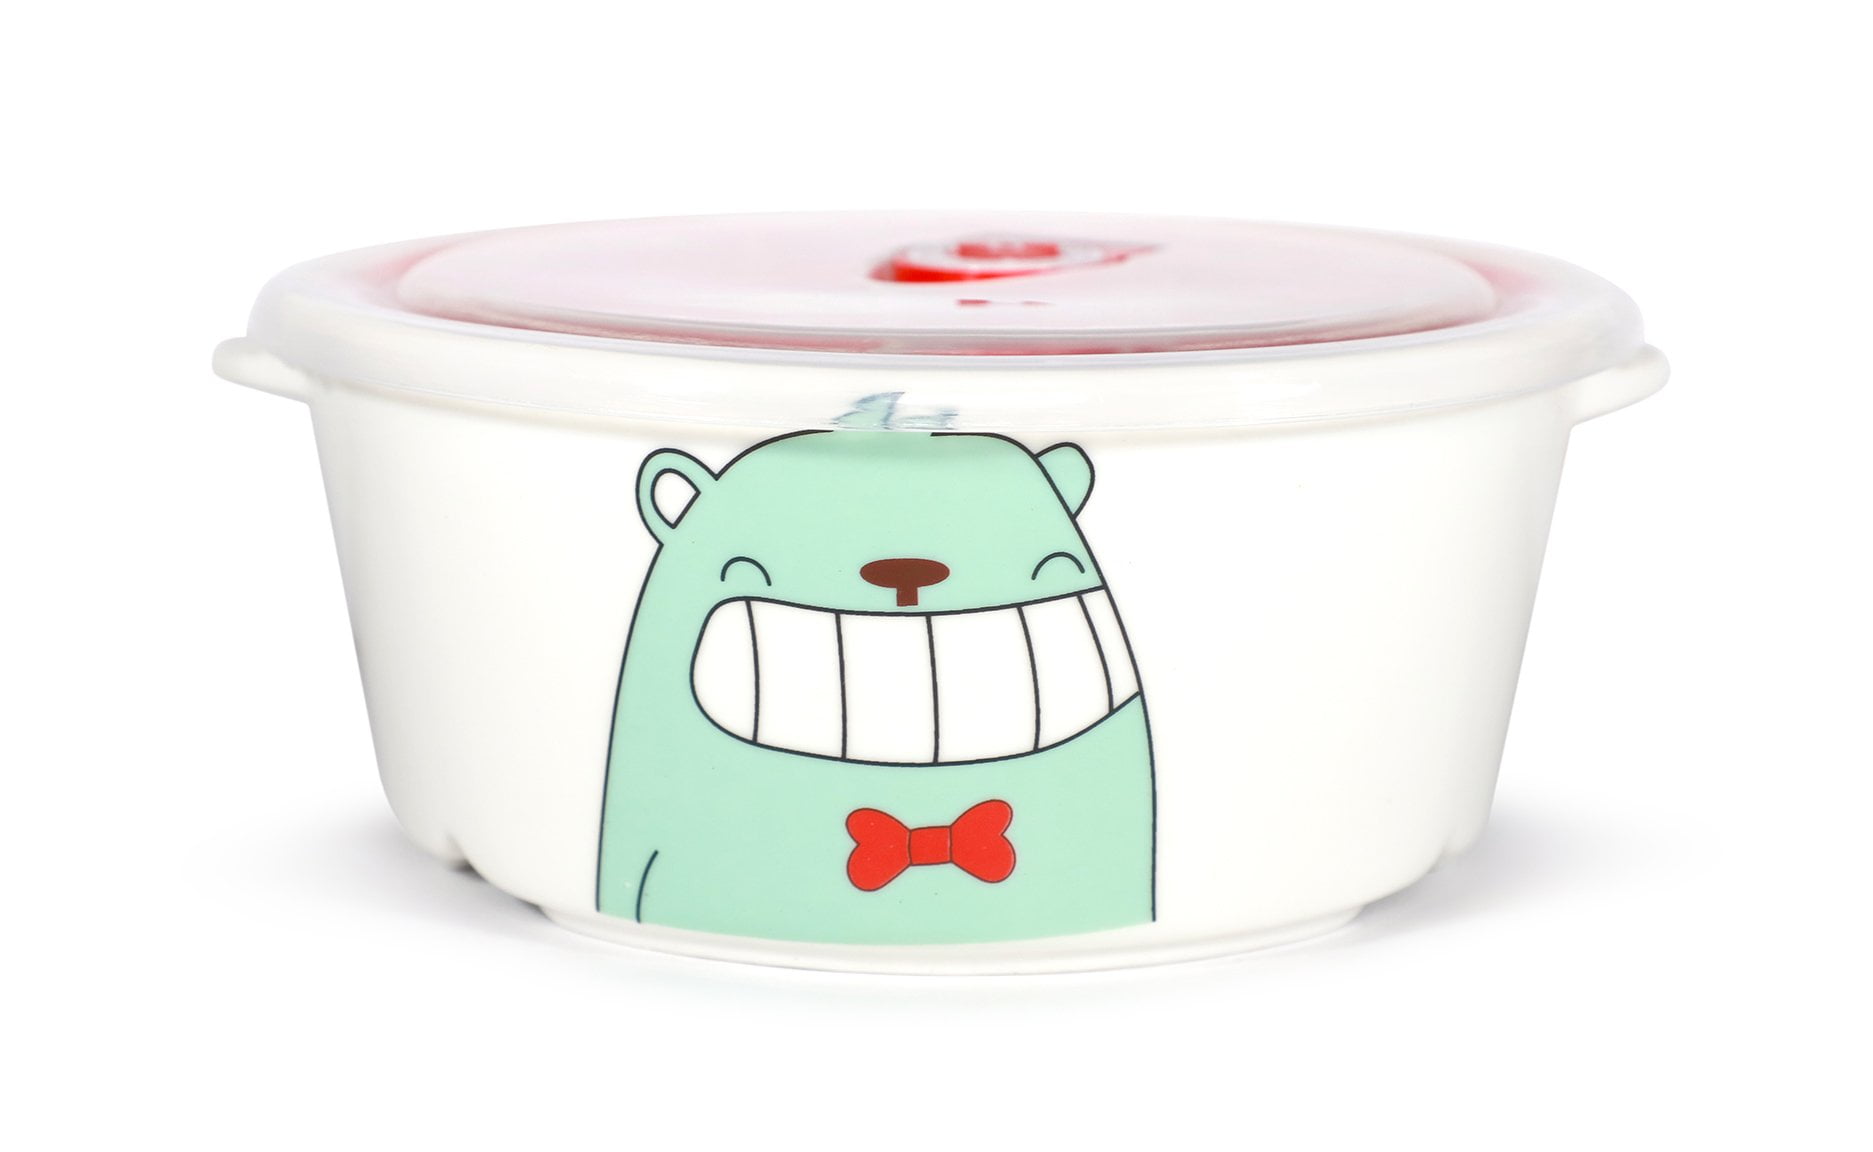 Ceramic Bento Lunch Box with Wooden Lid – InnerUnion